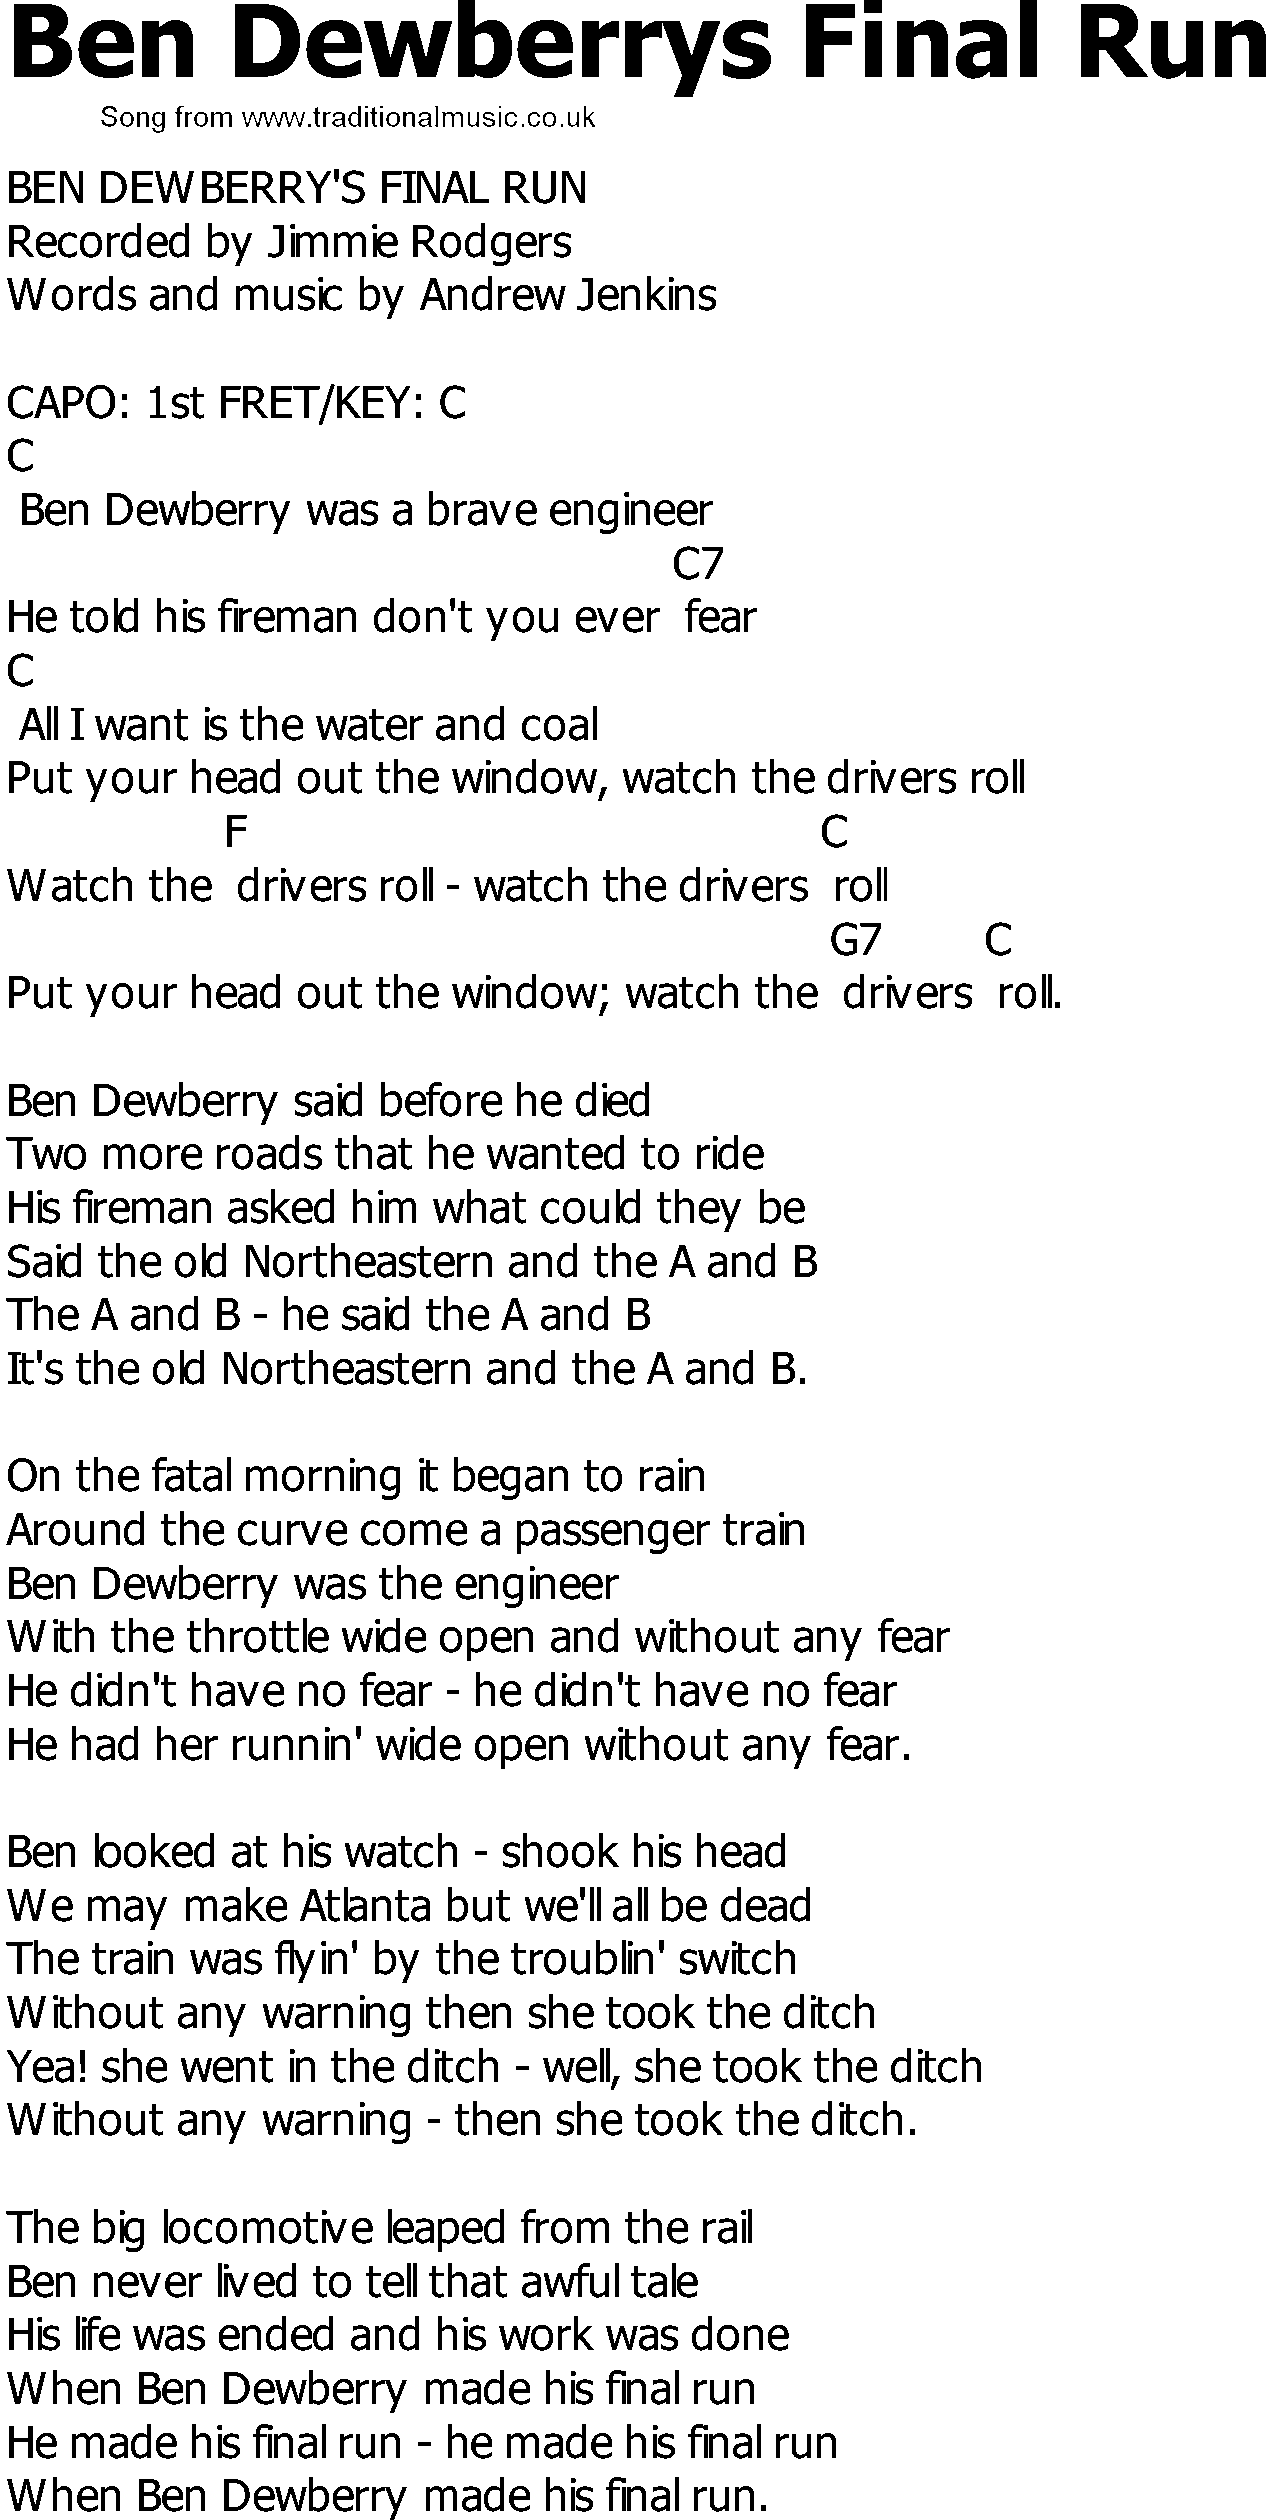 Old Country song lyrics with chords - Ben Dewberrys Final Run